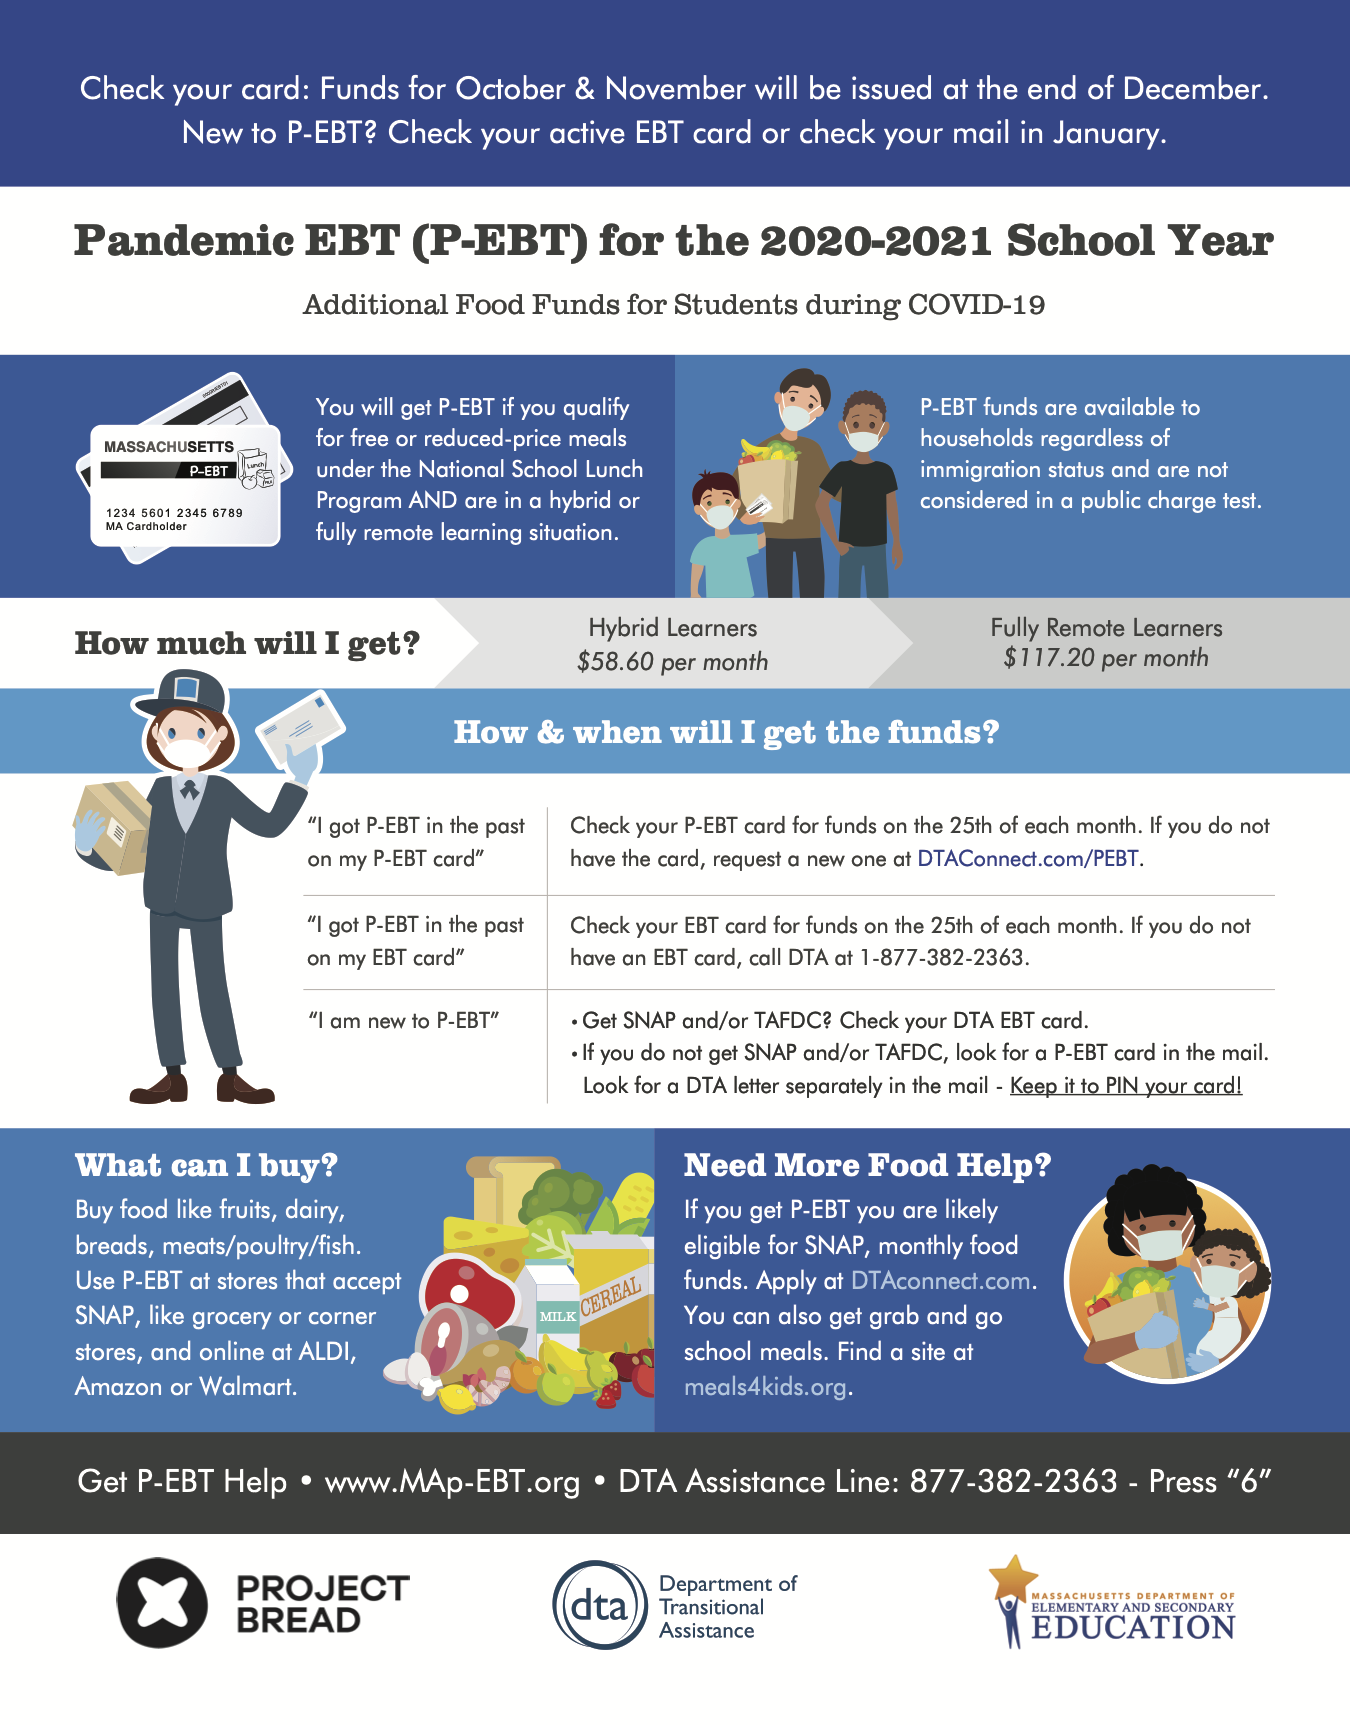 Pandemic EBT information for the 2020-2021 School Year